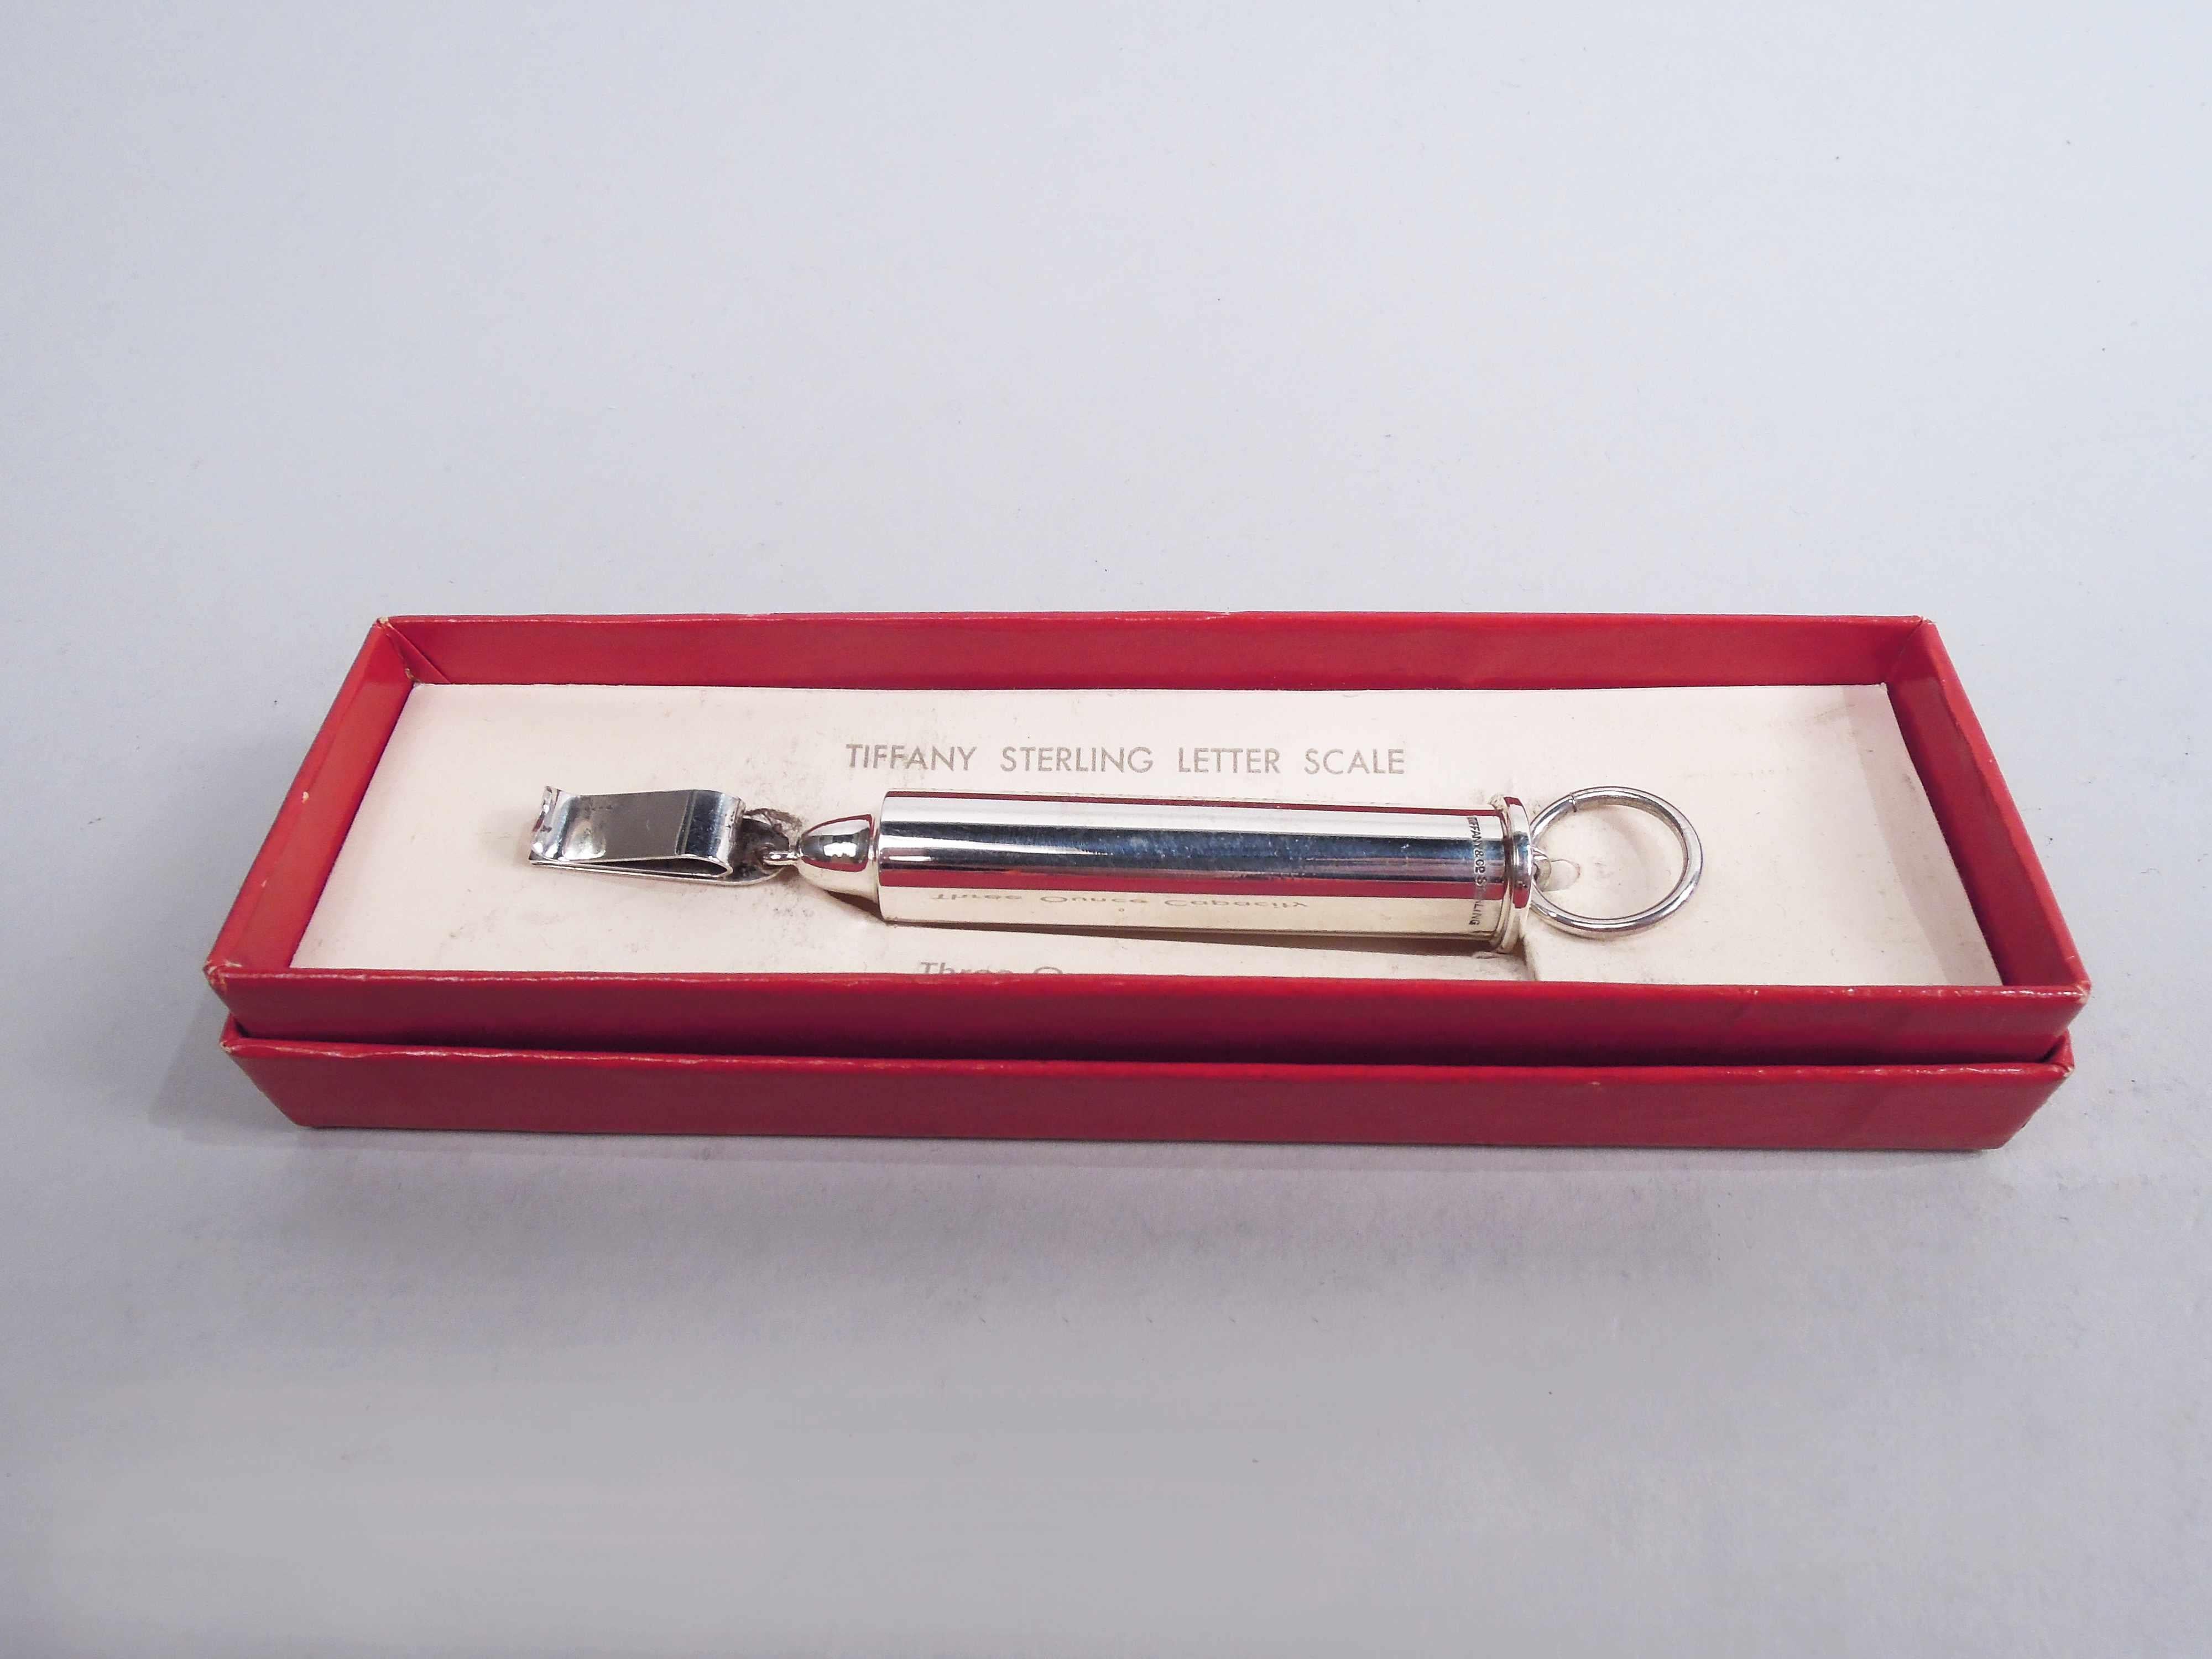 Modern sterling silver portable postage scale, ca 1930. Retailed by Tiffany & Co. in New York. Cylindrical with loose-mounted clip; top ring loose-mounted to pullout counterweight stick with engraved units in ounces. Measures a maximum of 3 ounces.